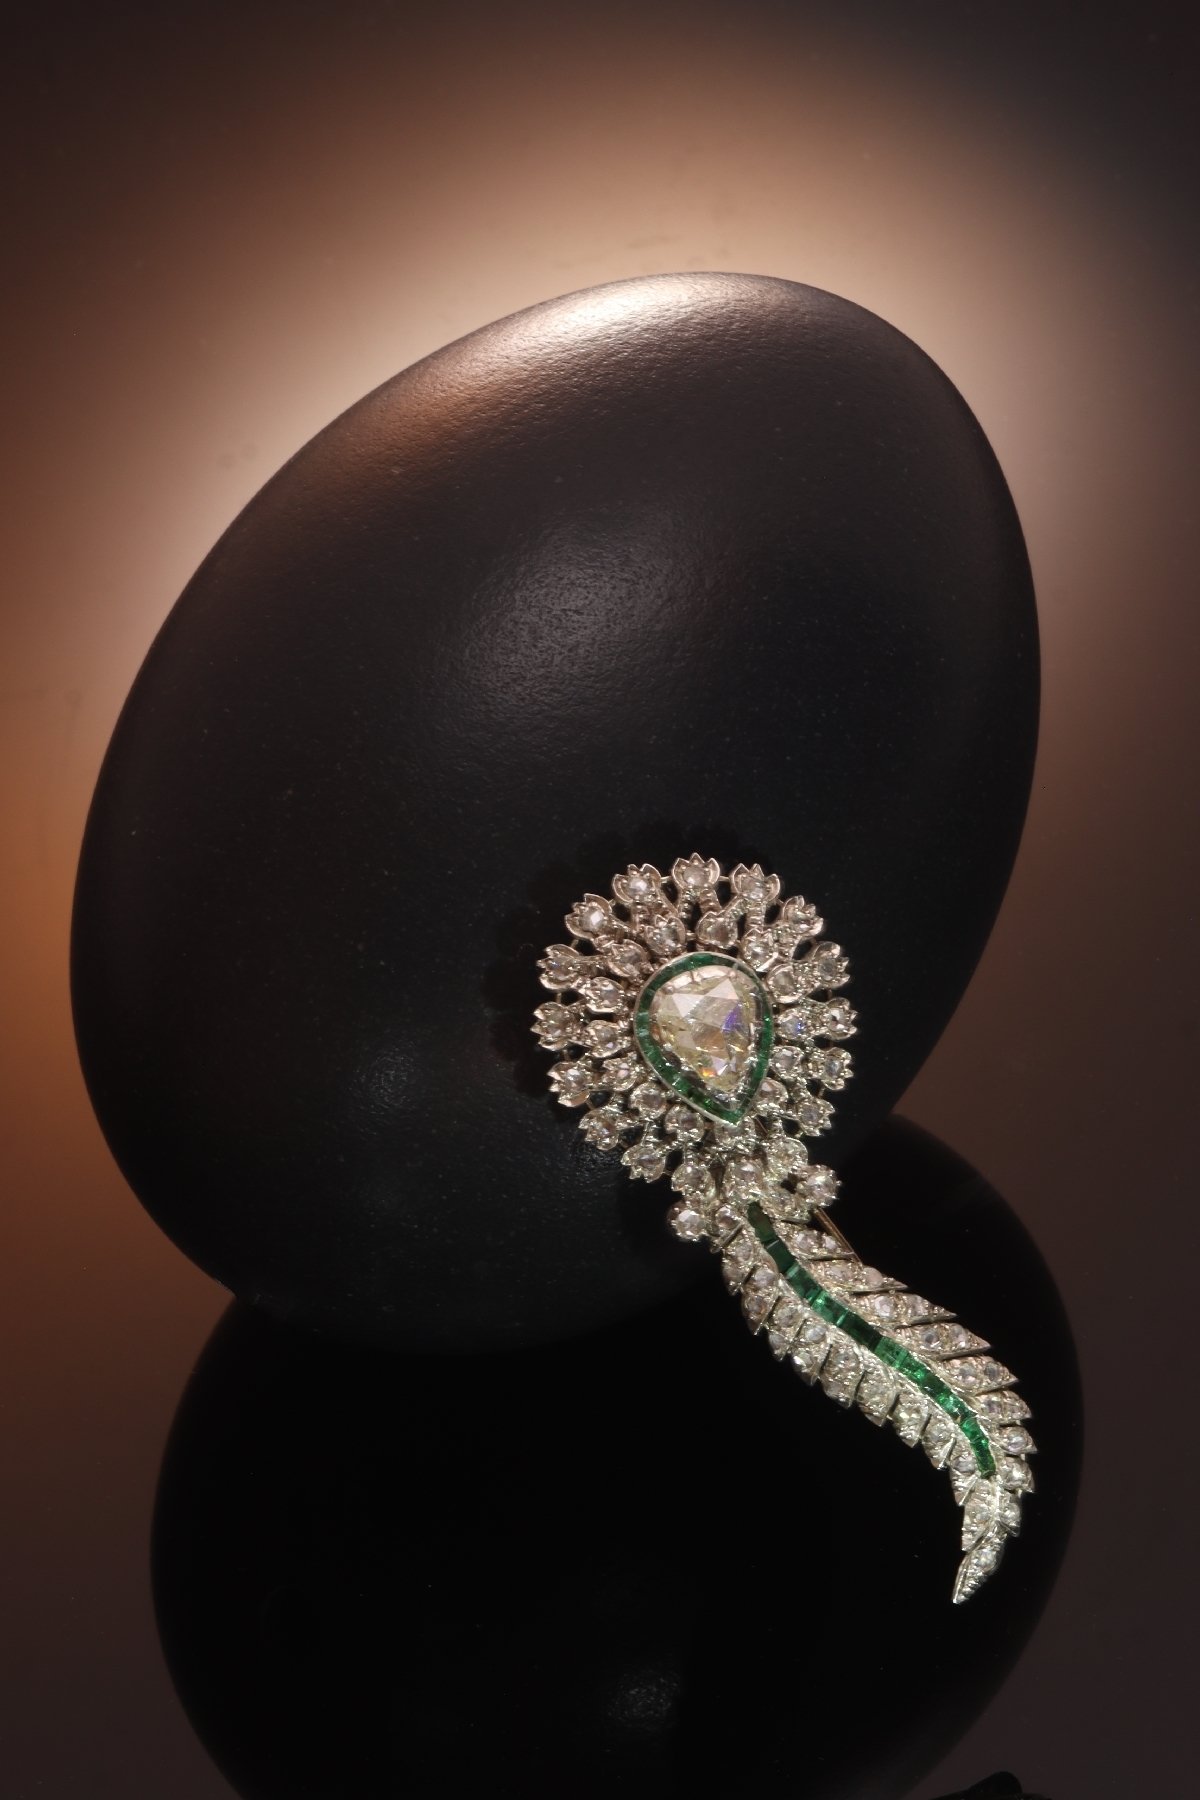 Click the picture to find out more about this antique brooch with large pear shaped rose cut diamond and set with many rose cut diamonds and carre cut emeralds